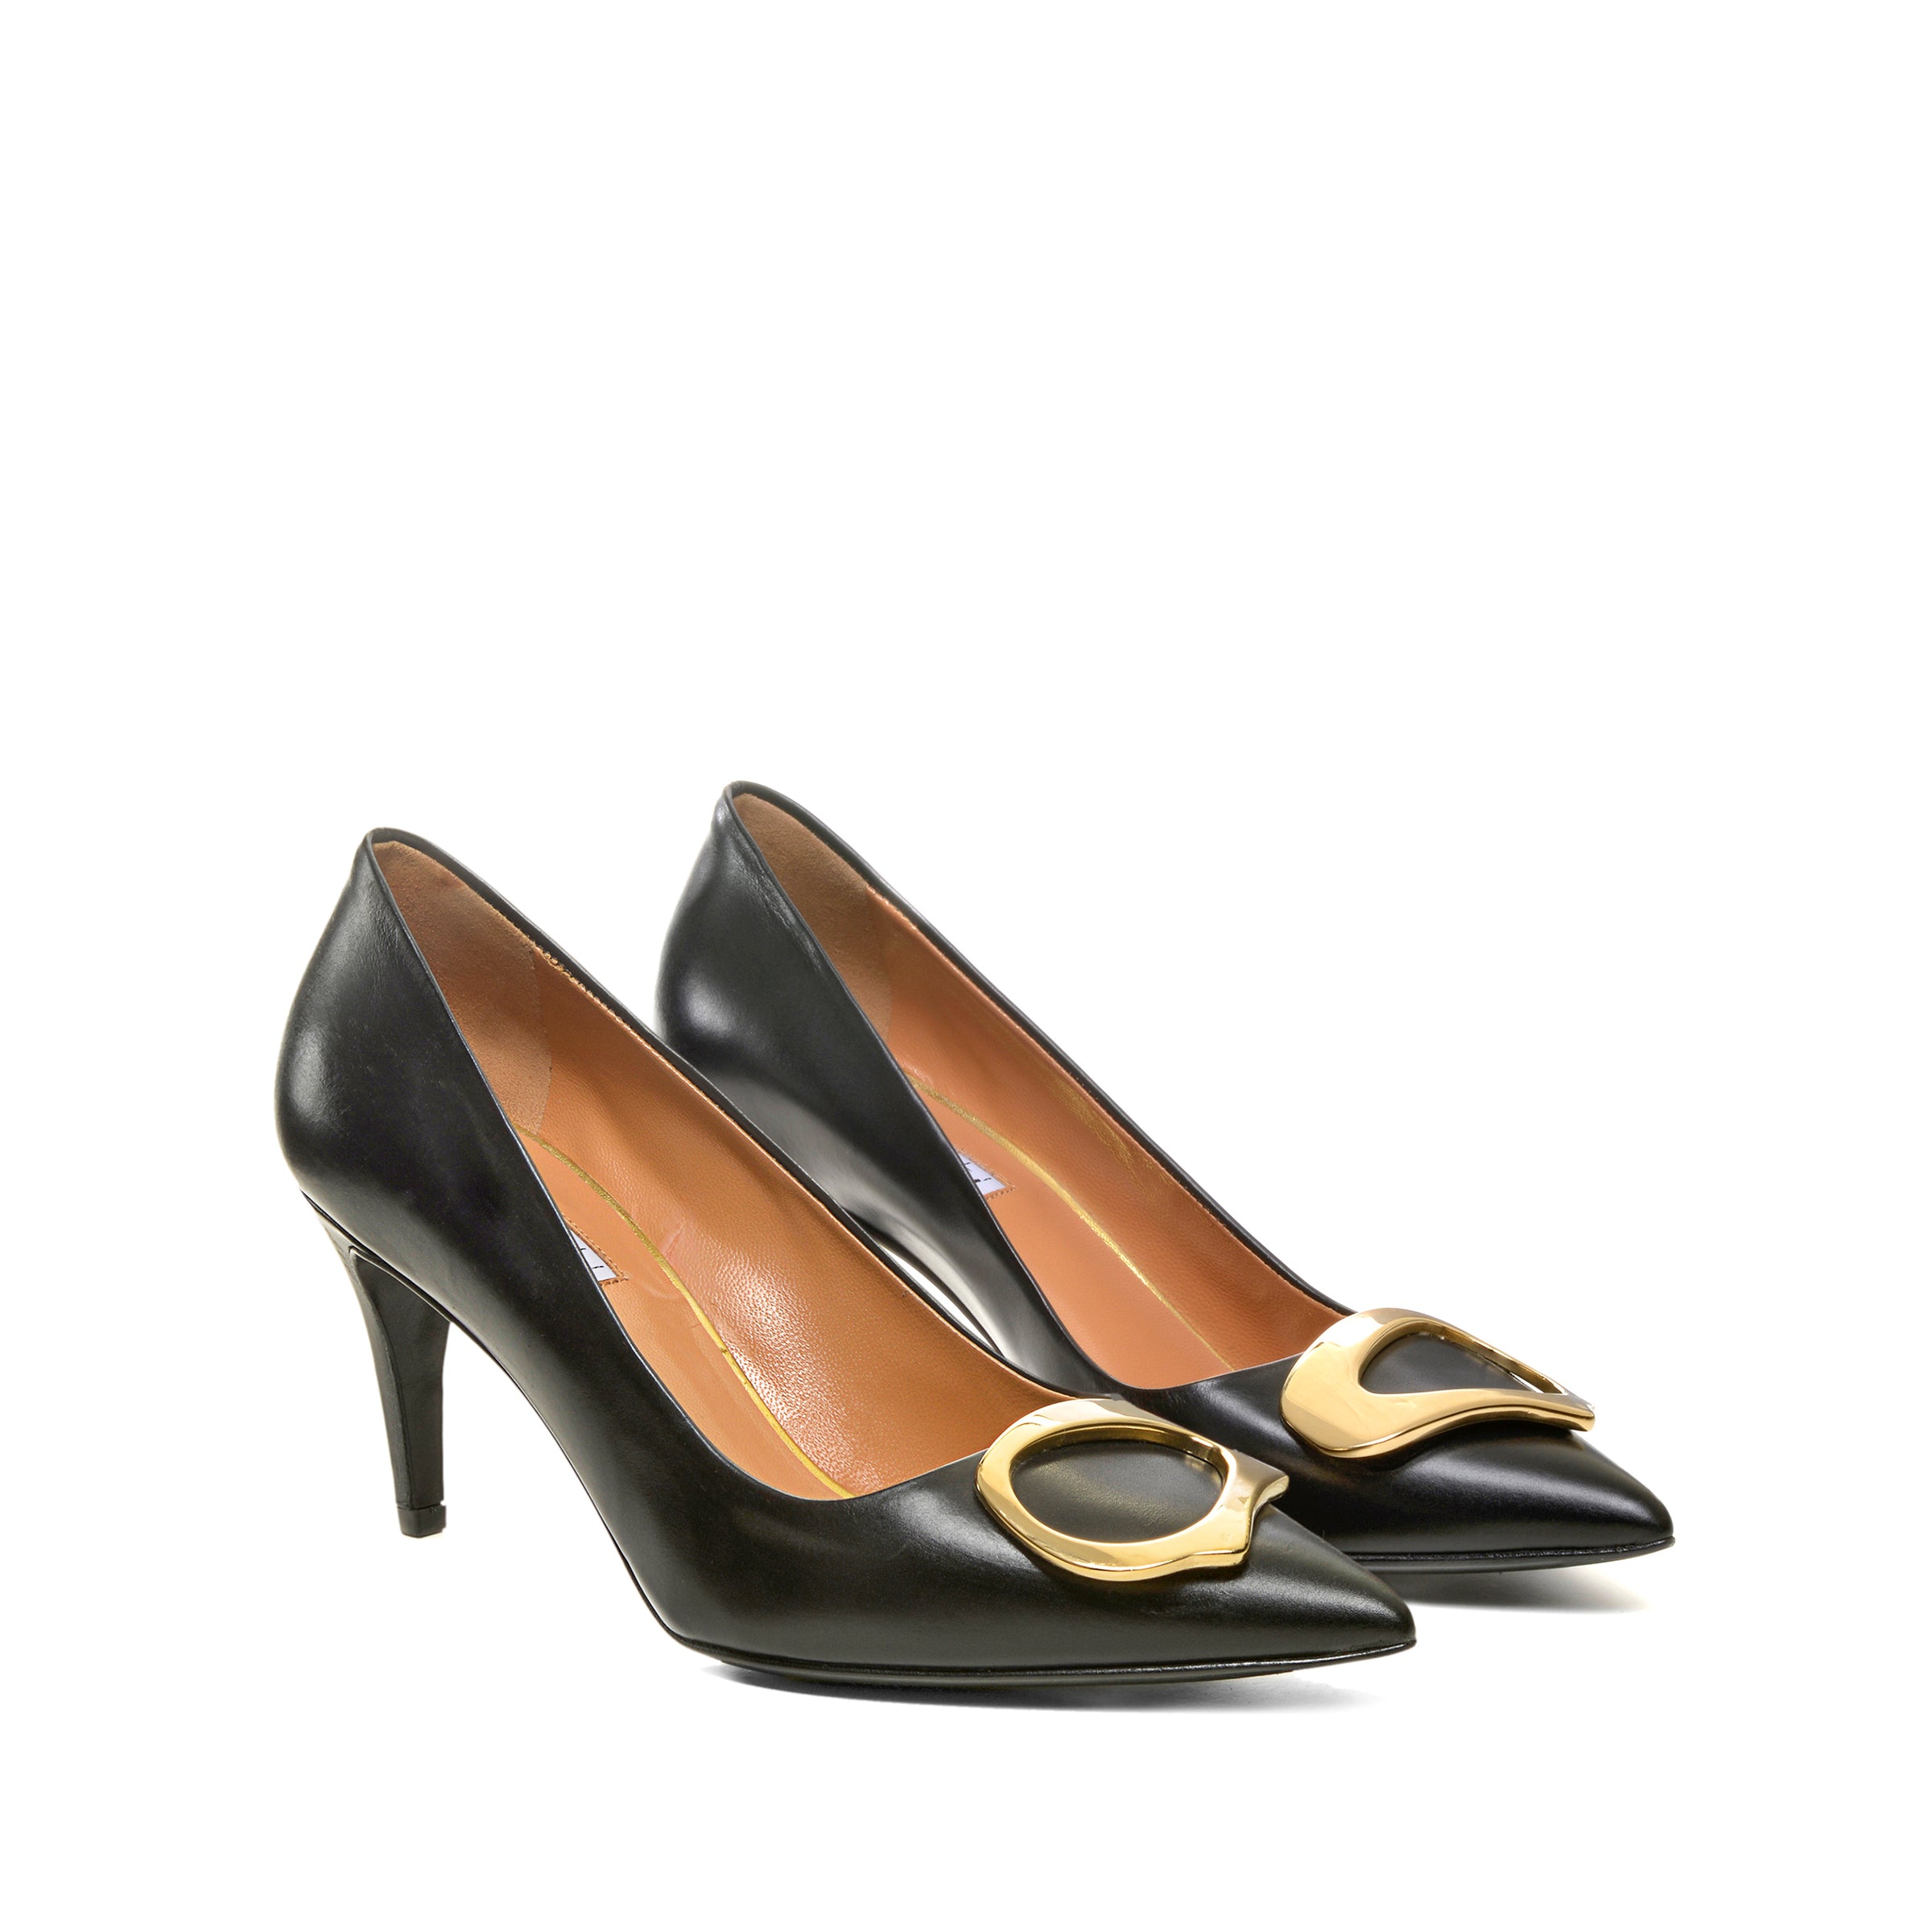 Shop The Latest Collection Of Fratelli Rossetti Woman Pump 66702 In Lebanon